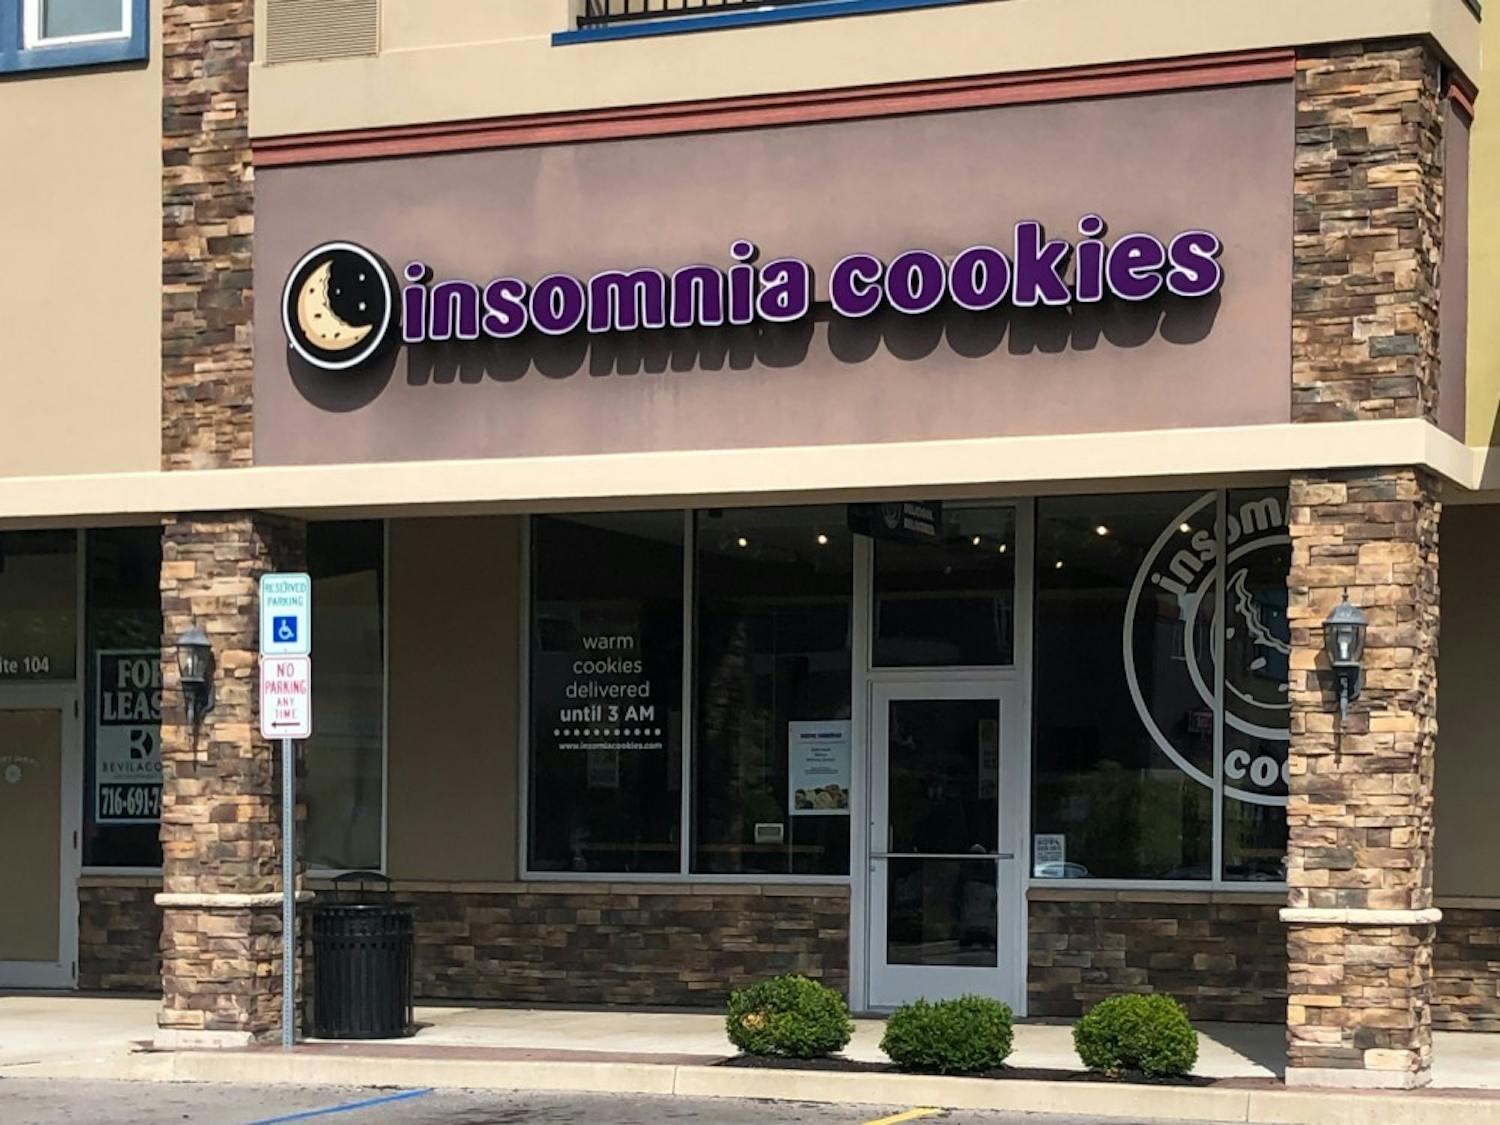 Insomnia Cookies has opened a new location across from North Campus in the University Place Plaza on Sweet Home Road, and students can't get enough.